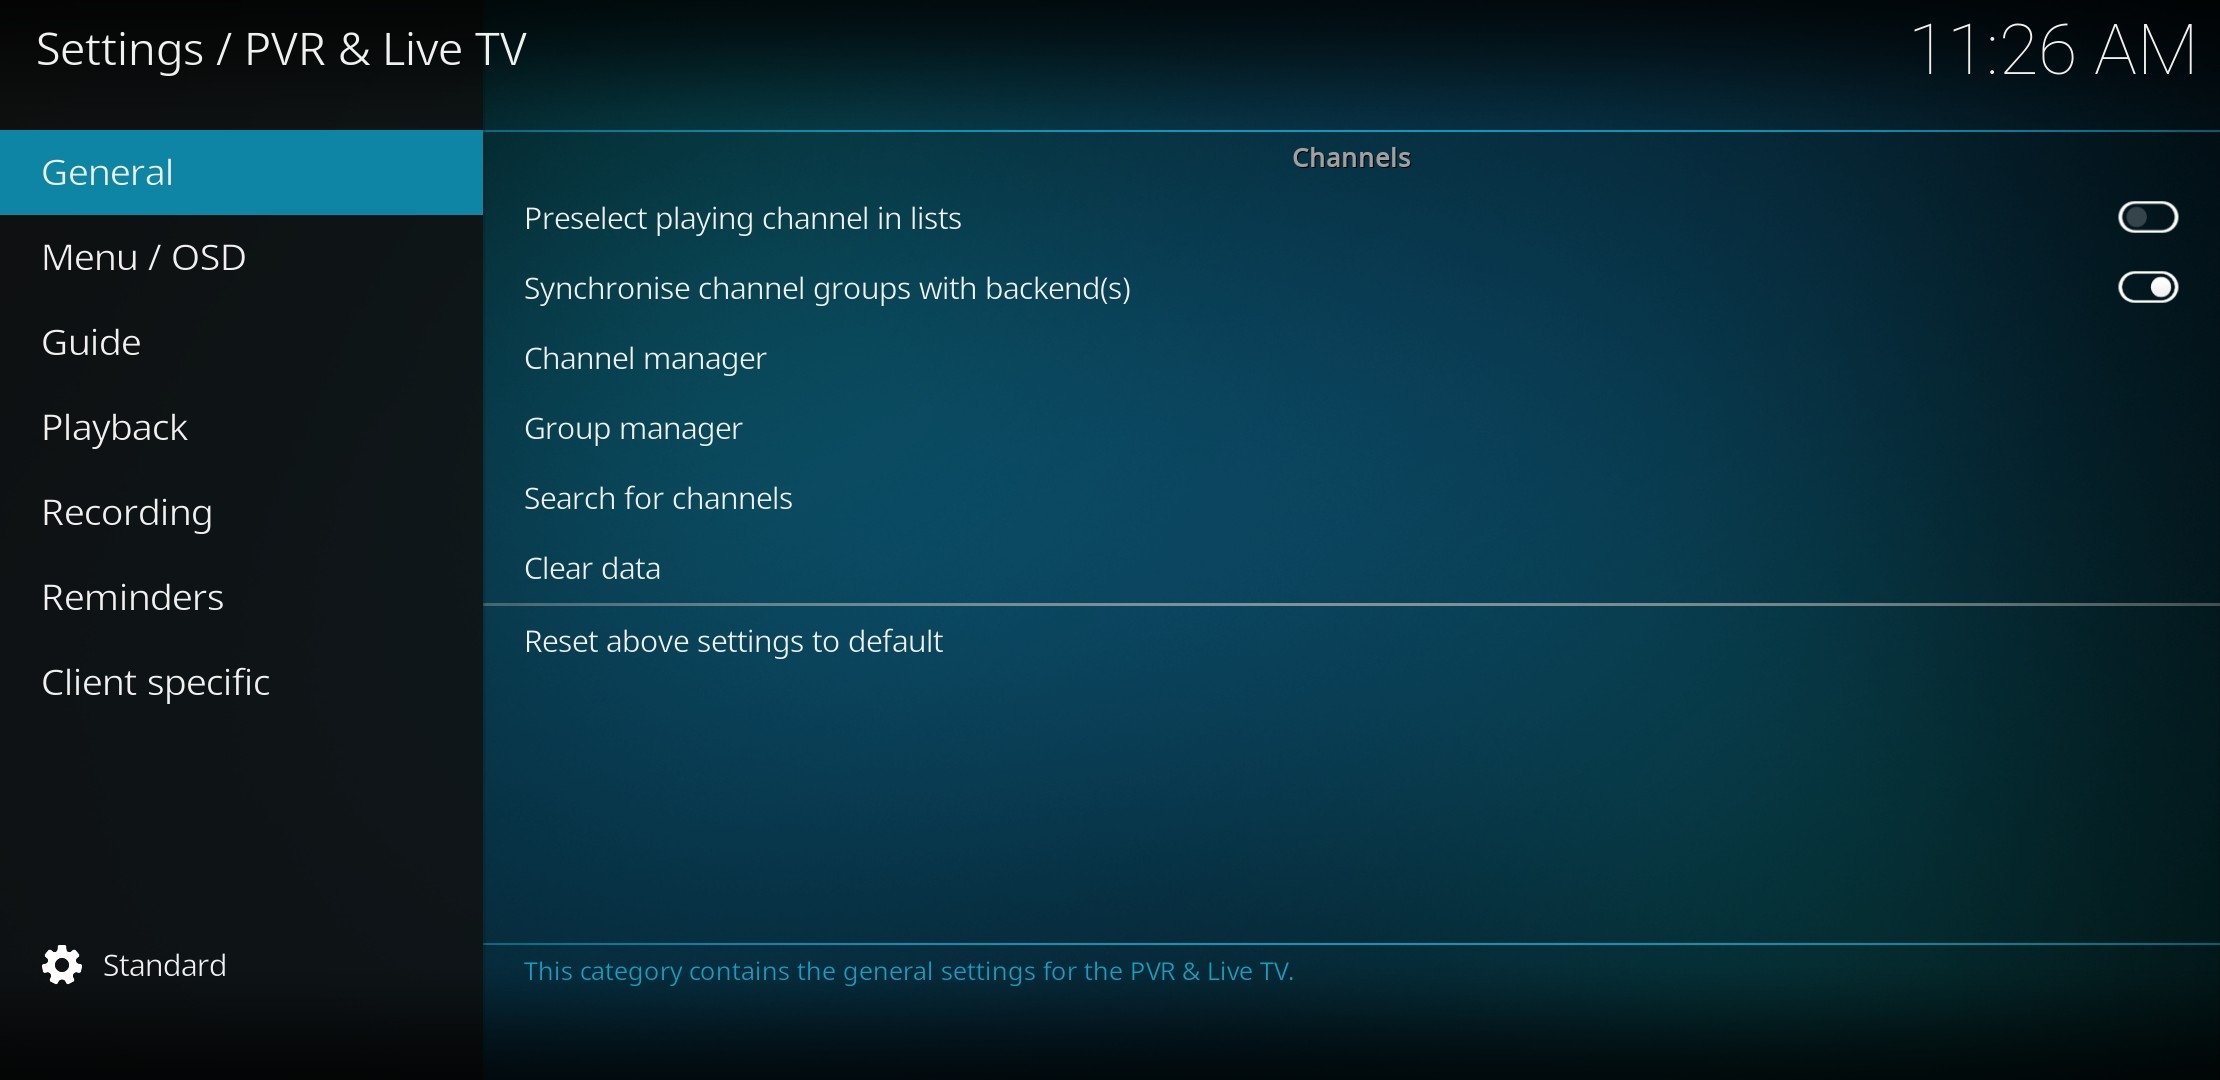 download the new for apple Kodi 20.2